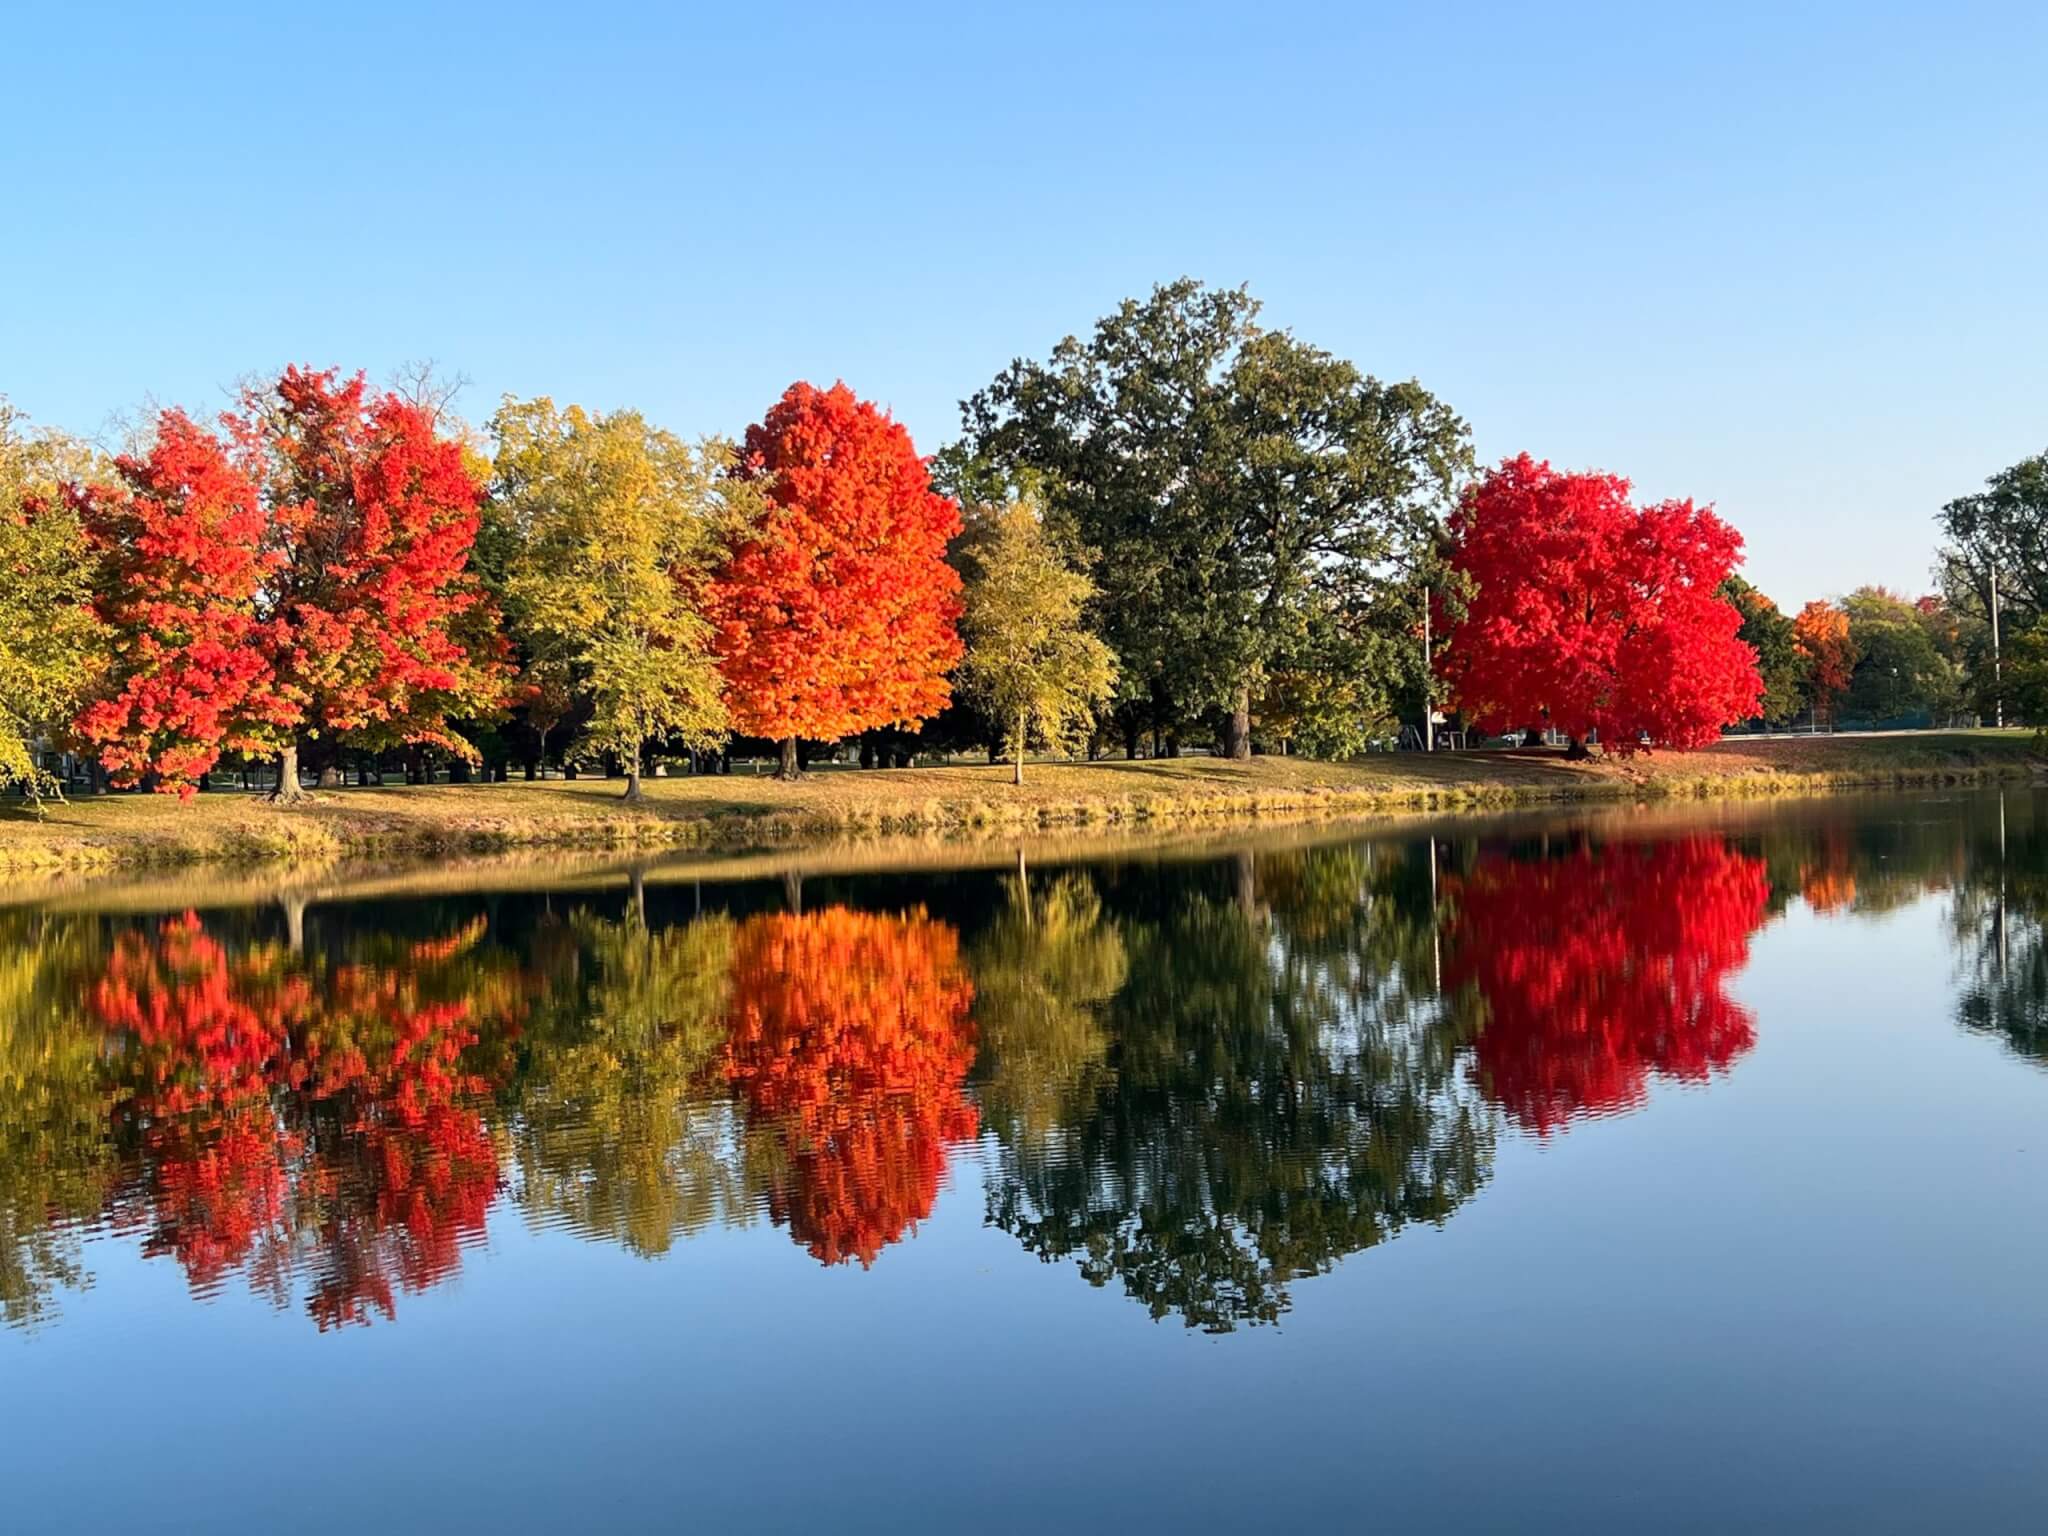 Beautiful view of fall foliage and nature along Lakeside Park in Fort Wayne, Indiana